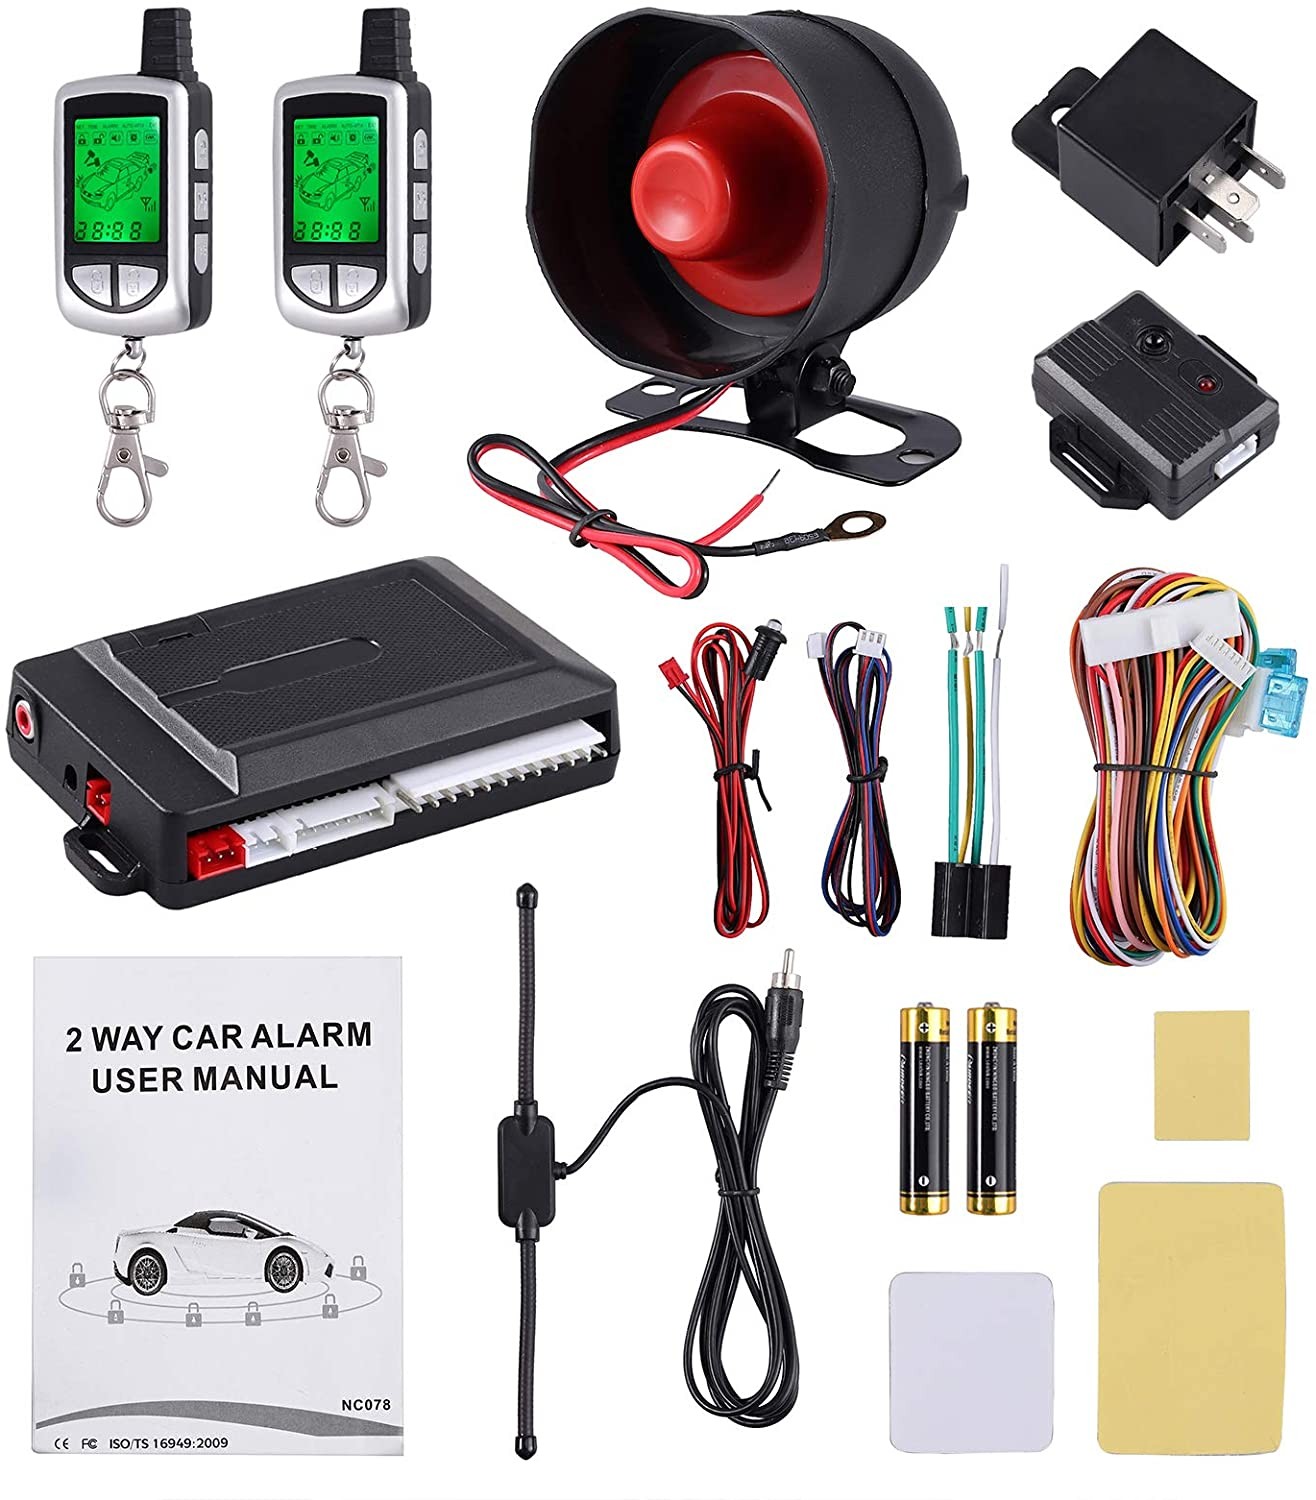 Troubleshooting Avital Remote Starter Esynic 2 Way Car Alarm Security System 12v Keyless Entry Ignition Push button Starter Pager with Two Way Lcd Remote Control Vehicle Security System Of Troubleshooting Avital Remote Starter